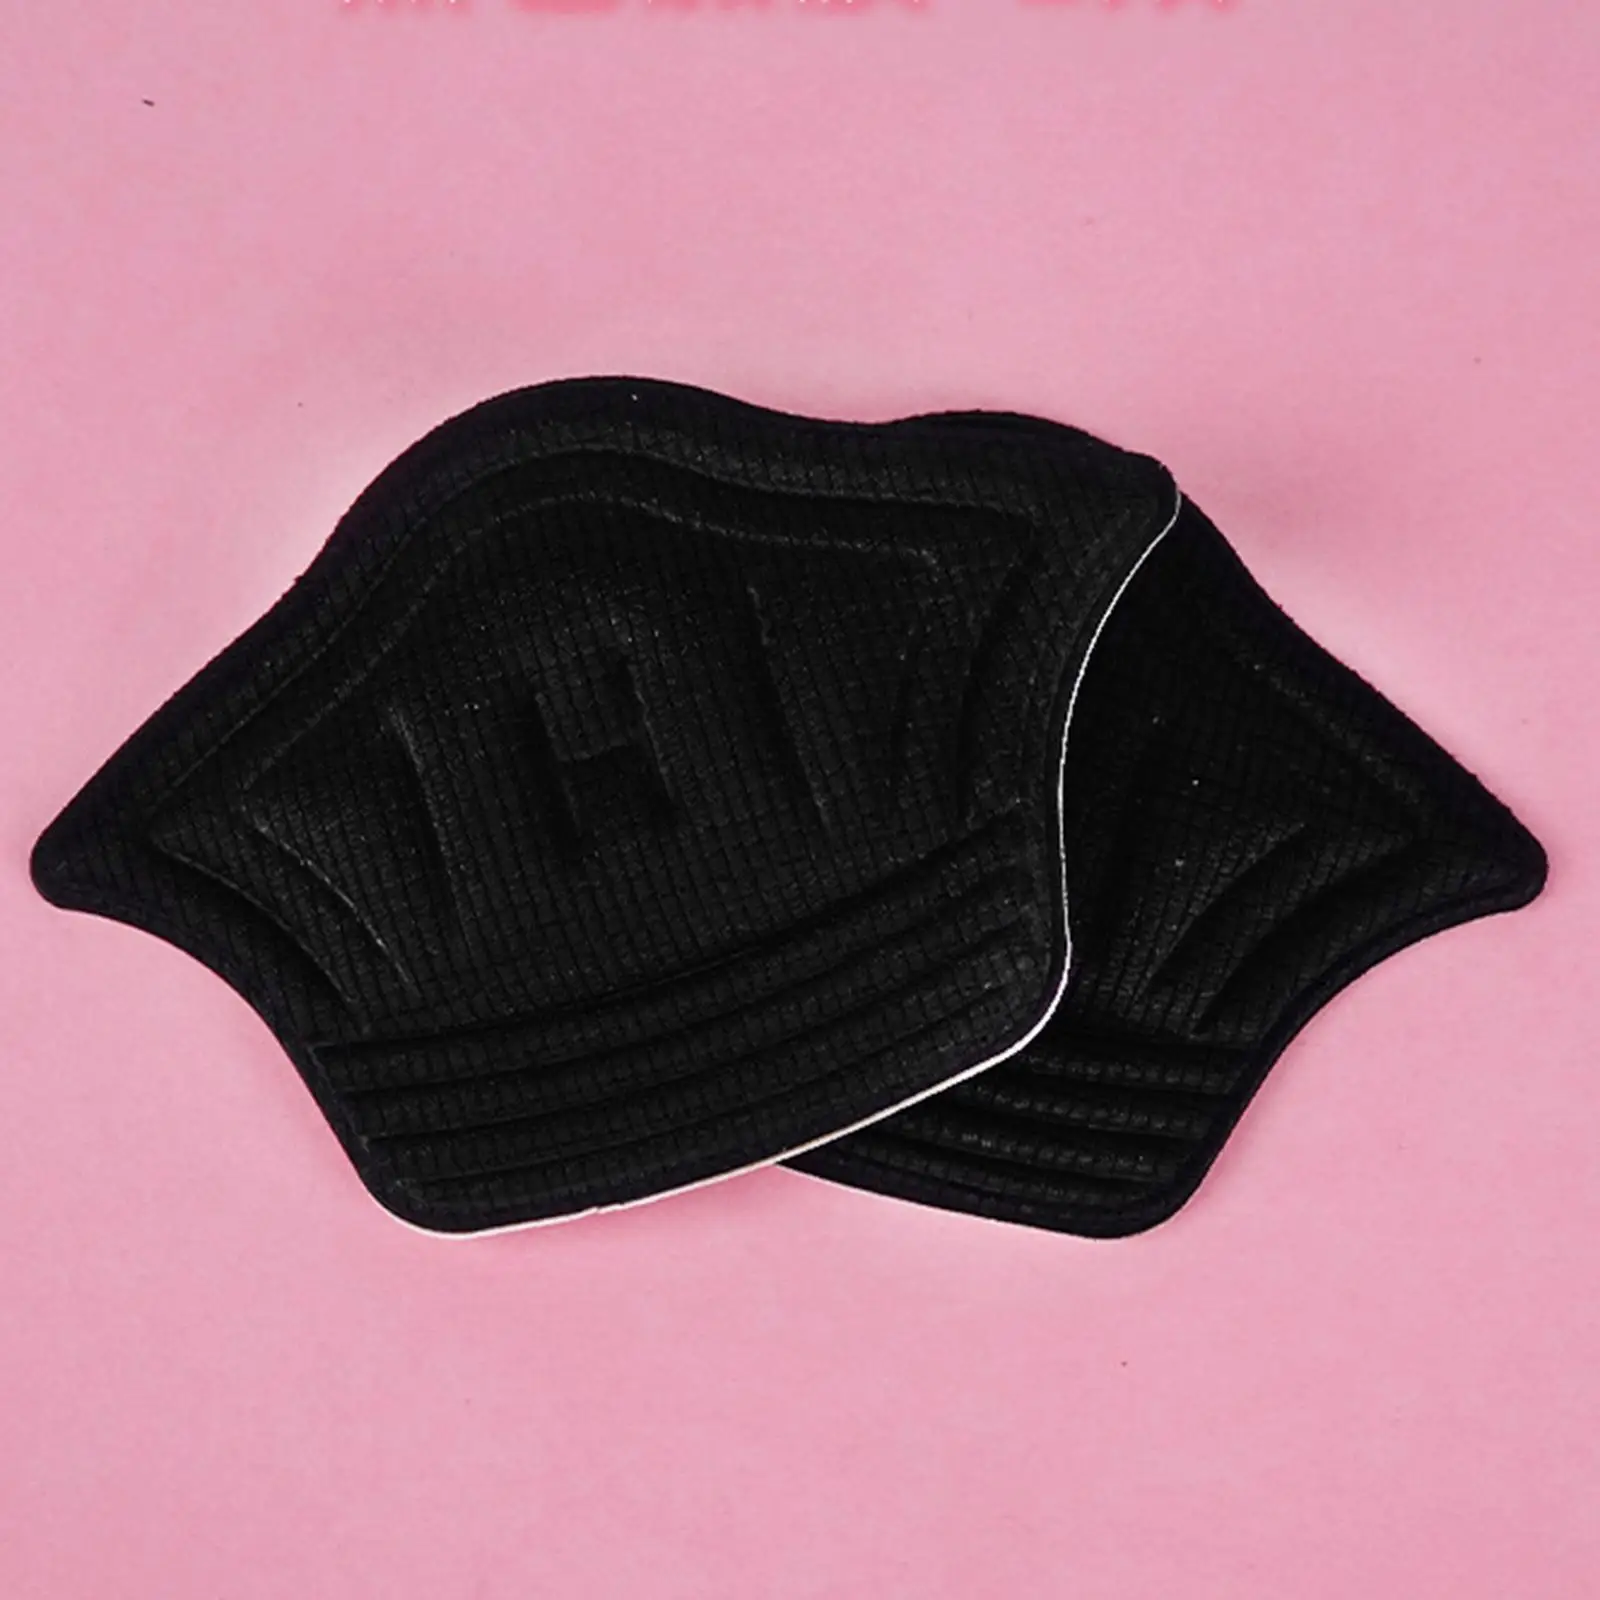  Pads,1 paar  The Self   Cushion Prevents the  From Slipping, Rubbing, Blistering,Unisex Can Improve the Comfort of Shoes